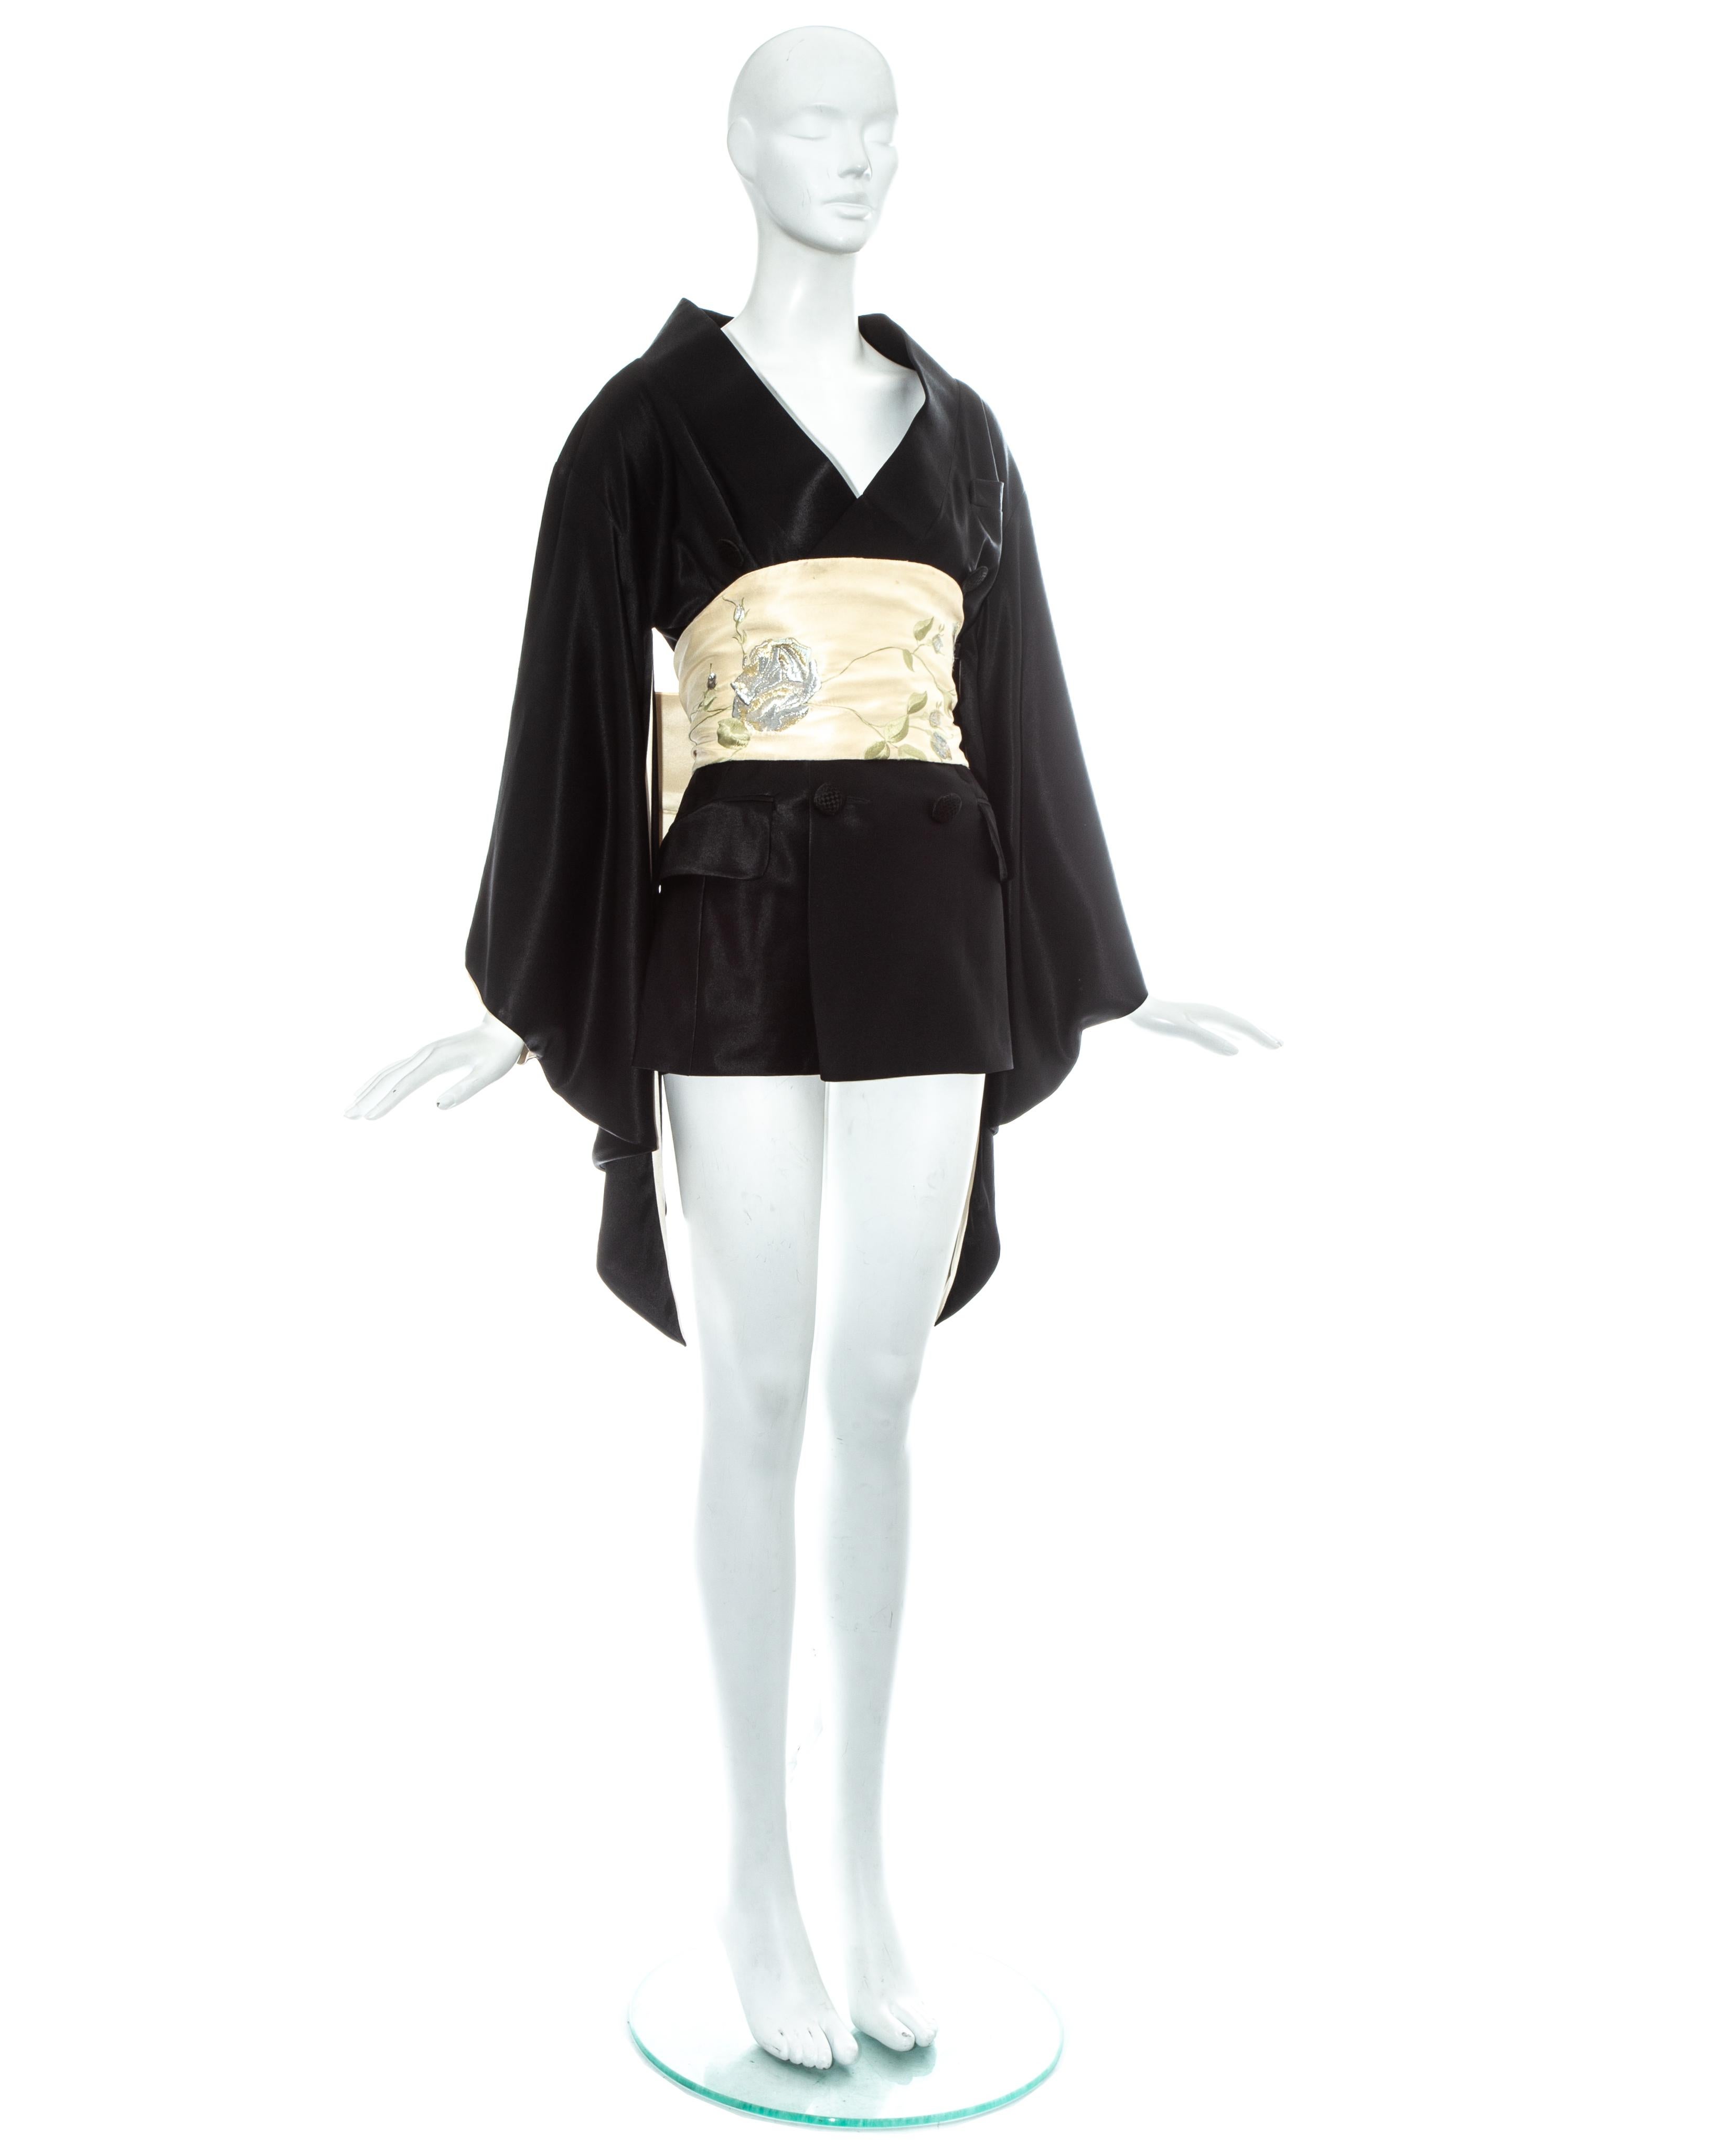 John Galliano; Black satin 'Minimono' / kimono mini dress with embroidered silk obi belt. From the 'Black' collection, one of Galliano's most revered and collectible collections. 

Fall-Winter 1994